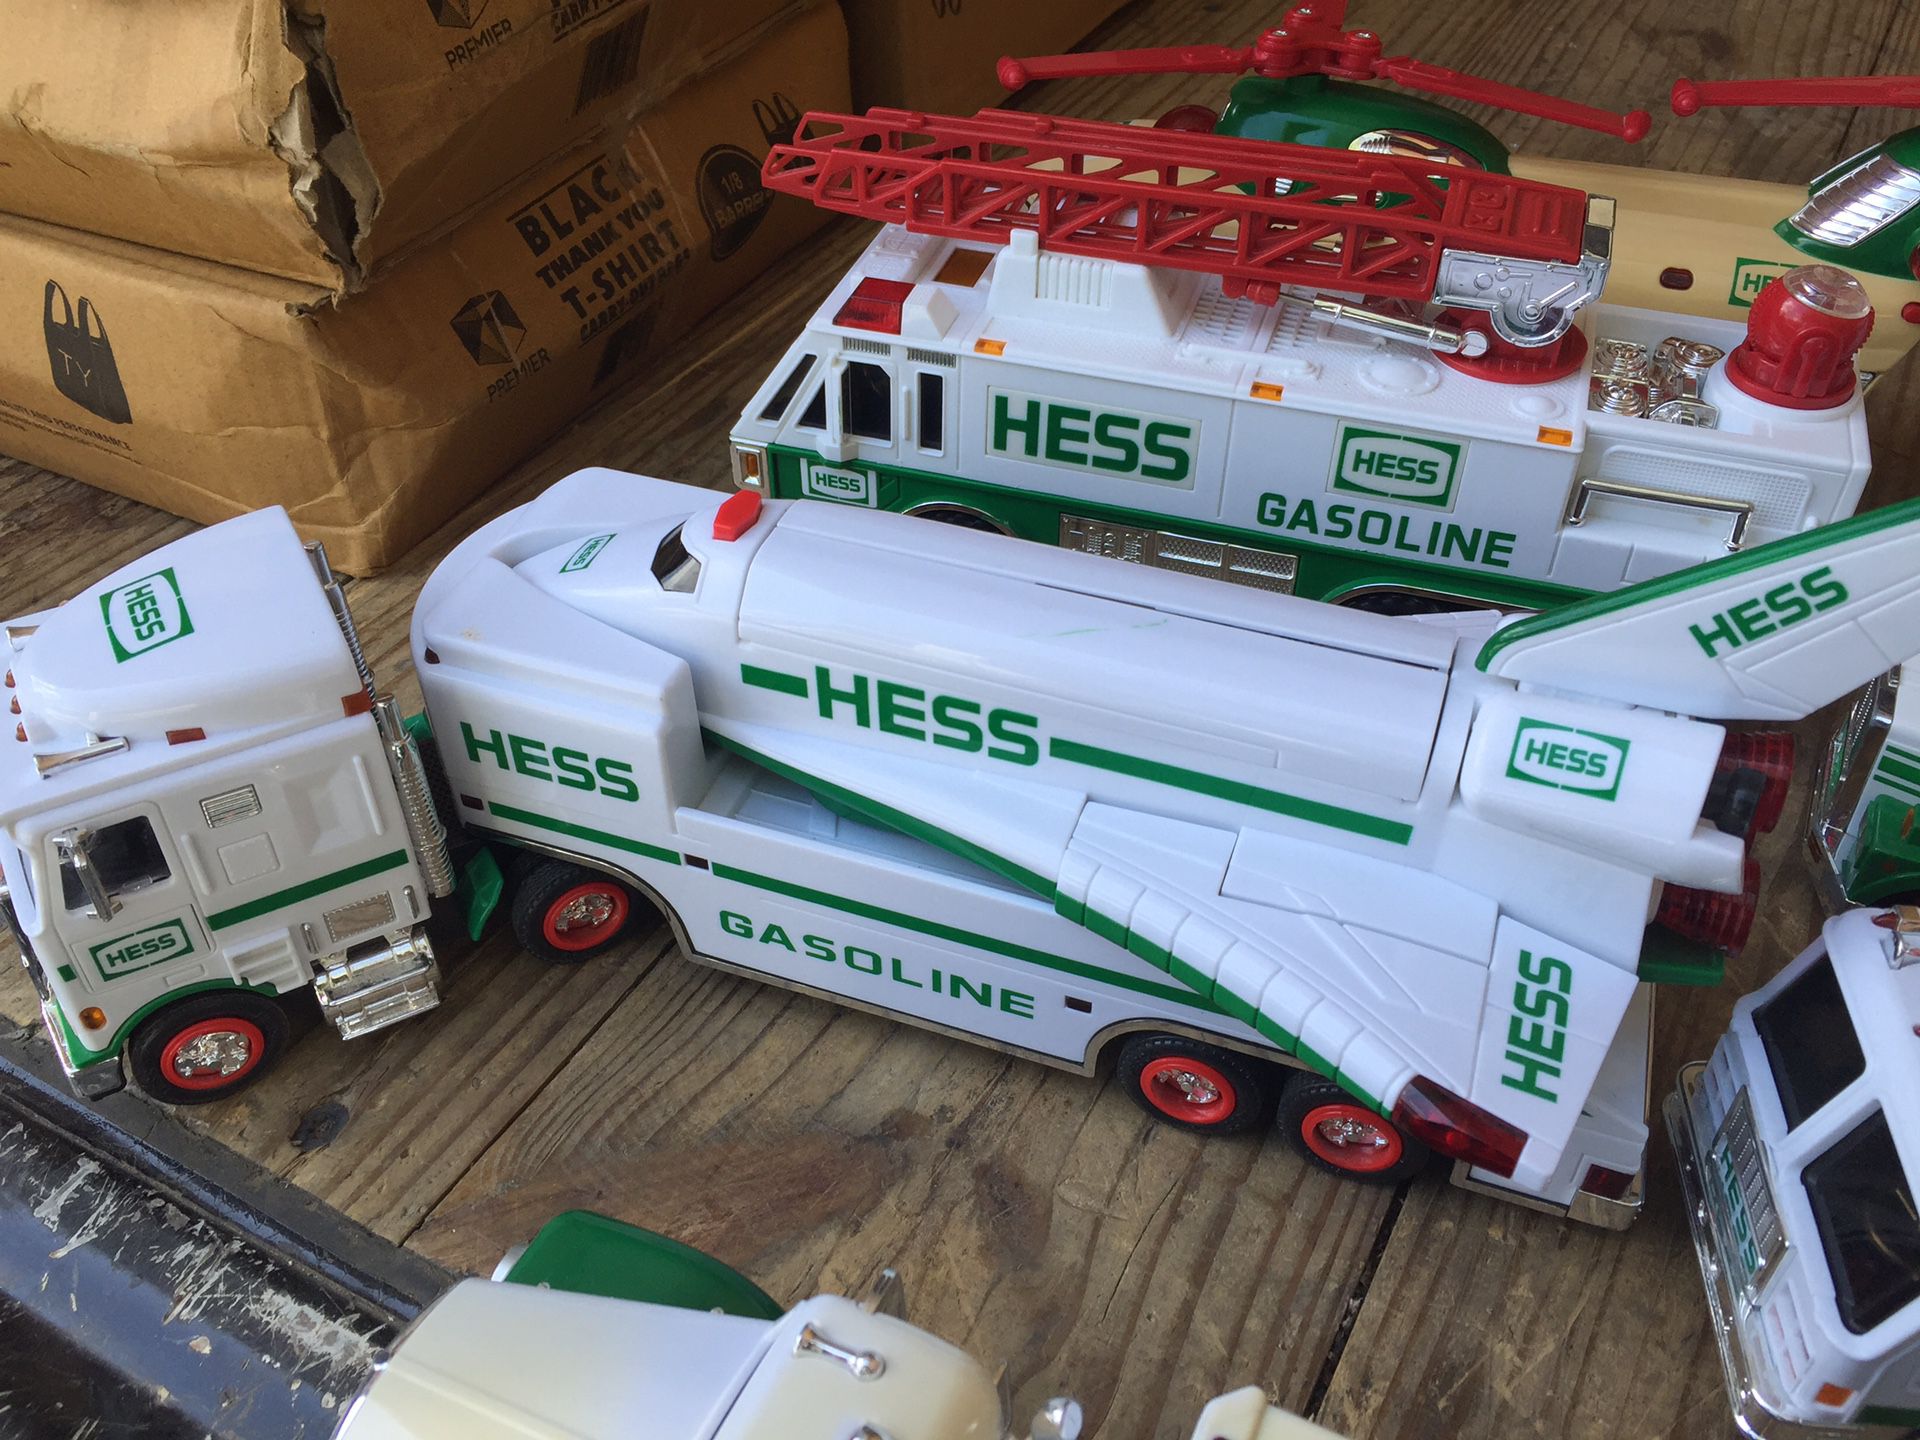 Hess toy collection